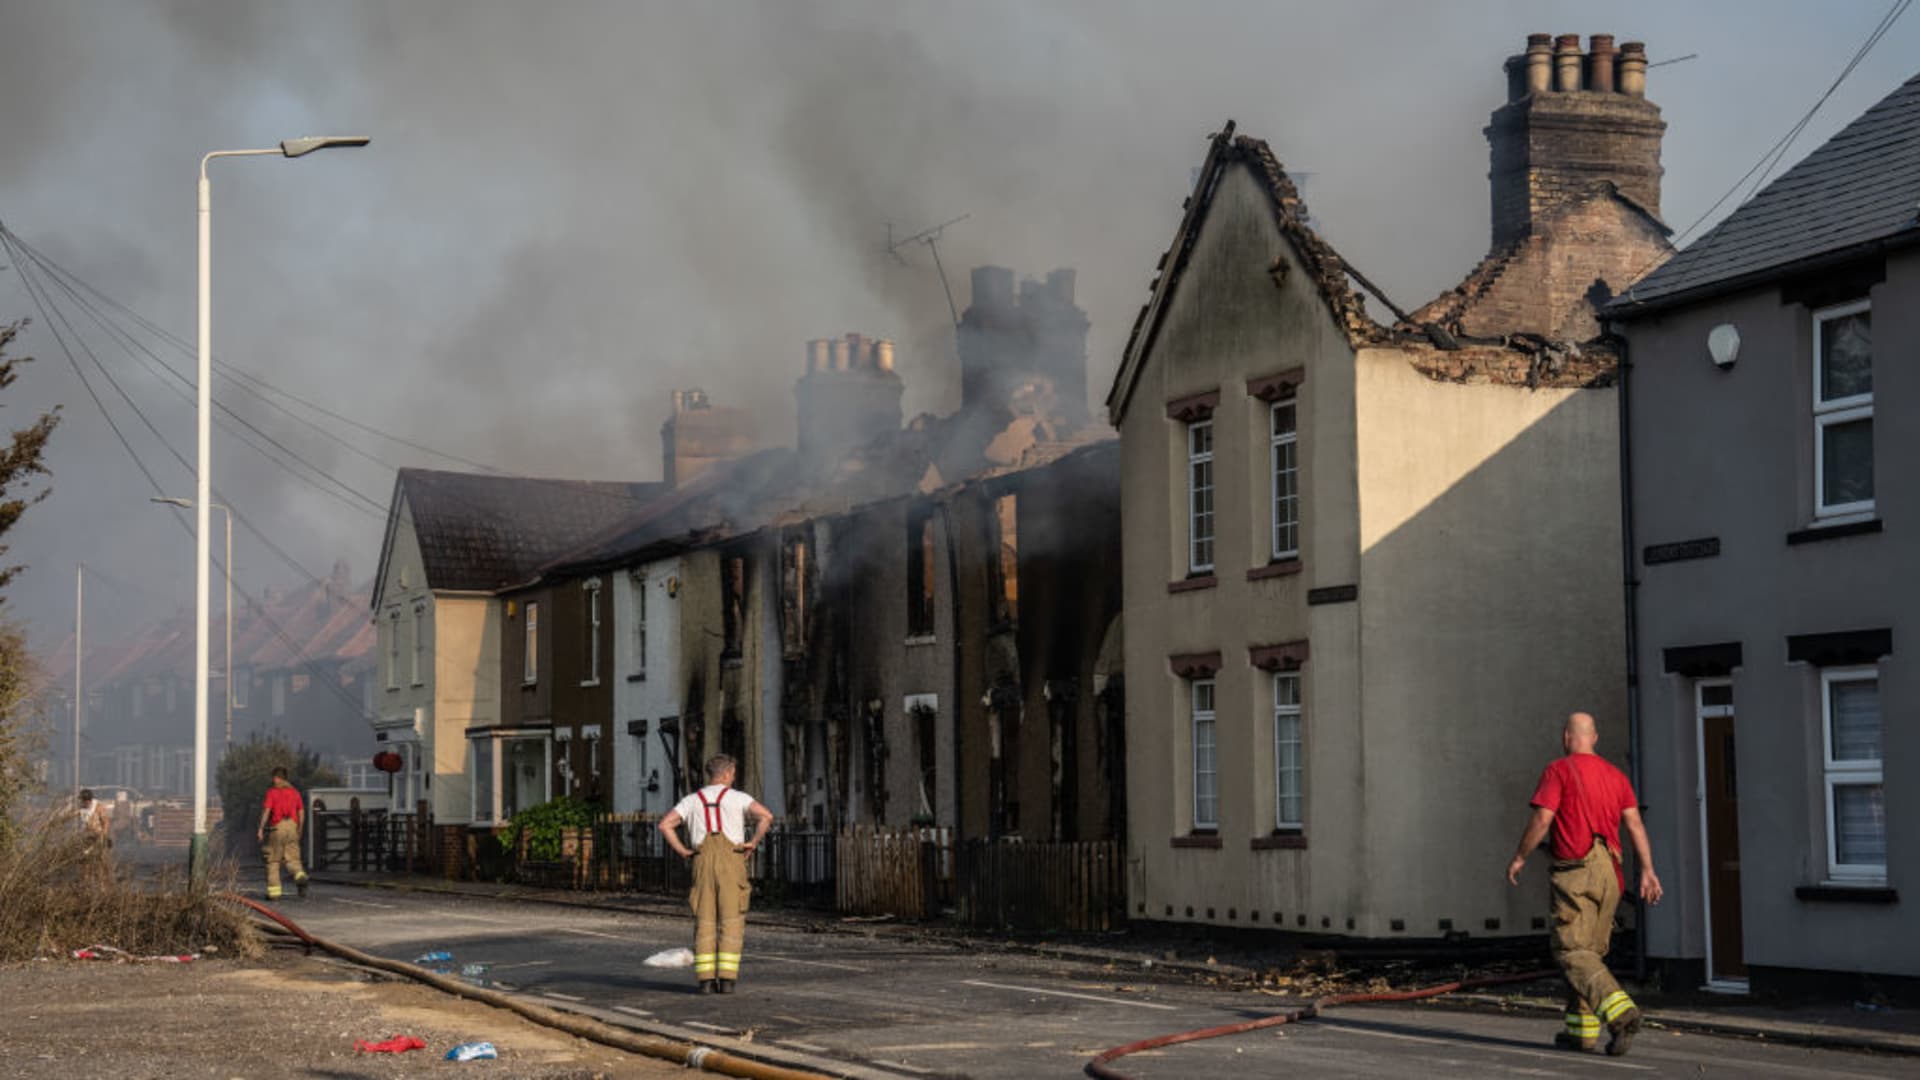 Fireman work next to buildings destroyed by fire on July 19, 2022 in Wennington, England. A series of grass fires broke out around the British capital amid an intense heatwave.